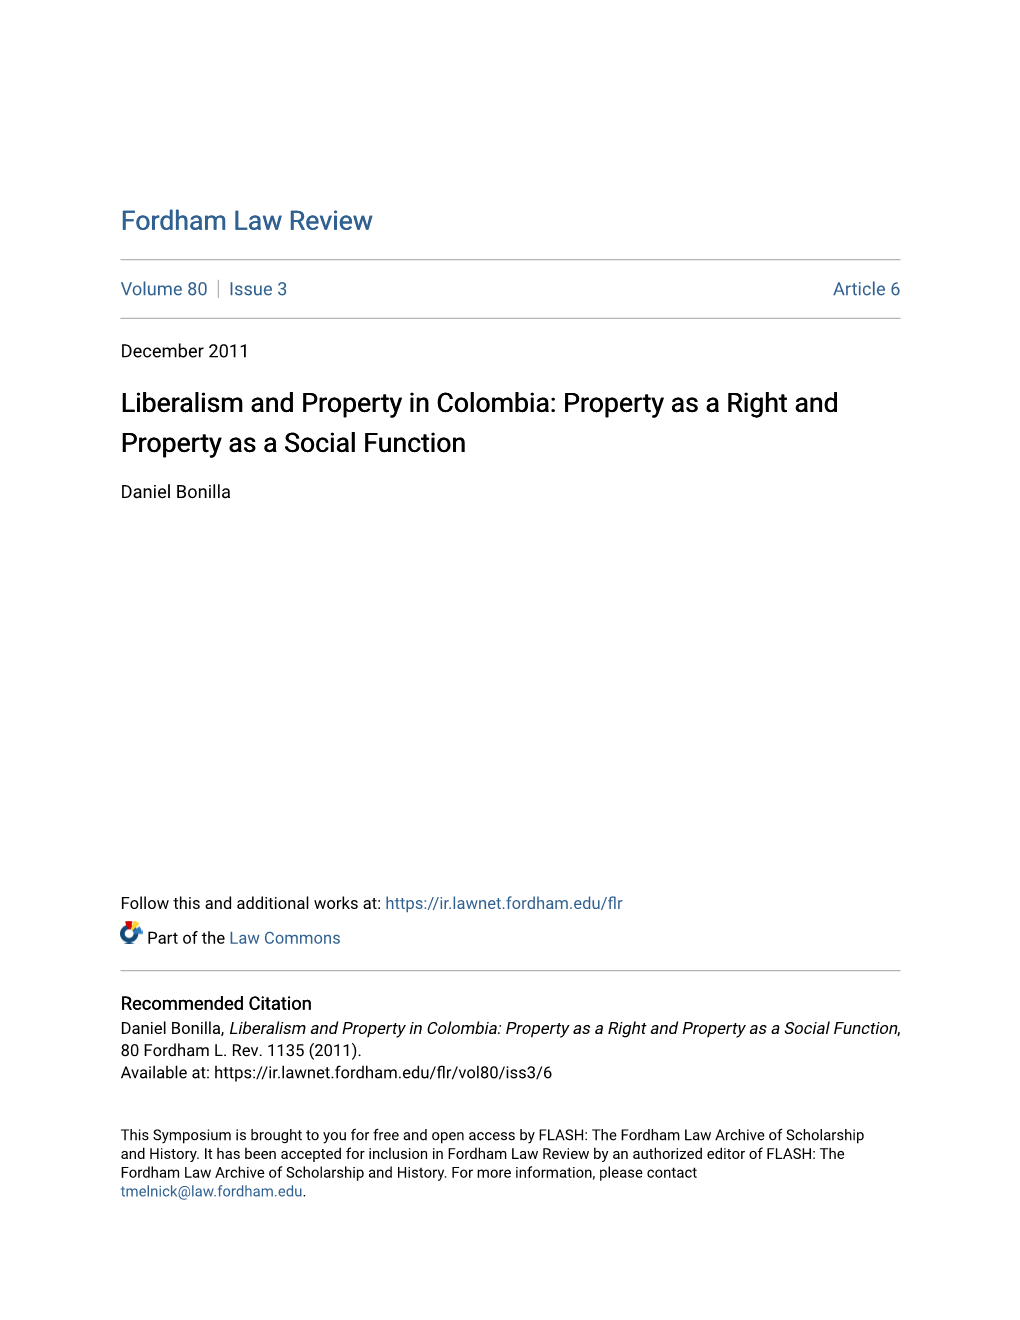 Liberalism and Property in Colombia: Property As a Right and Property As a Social Function